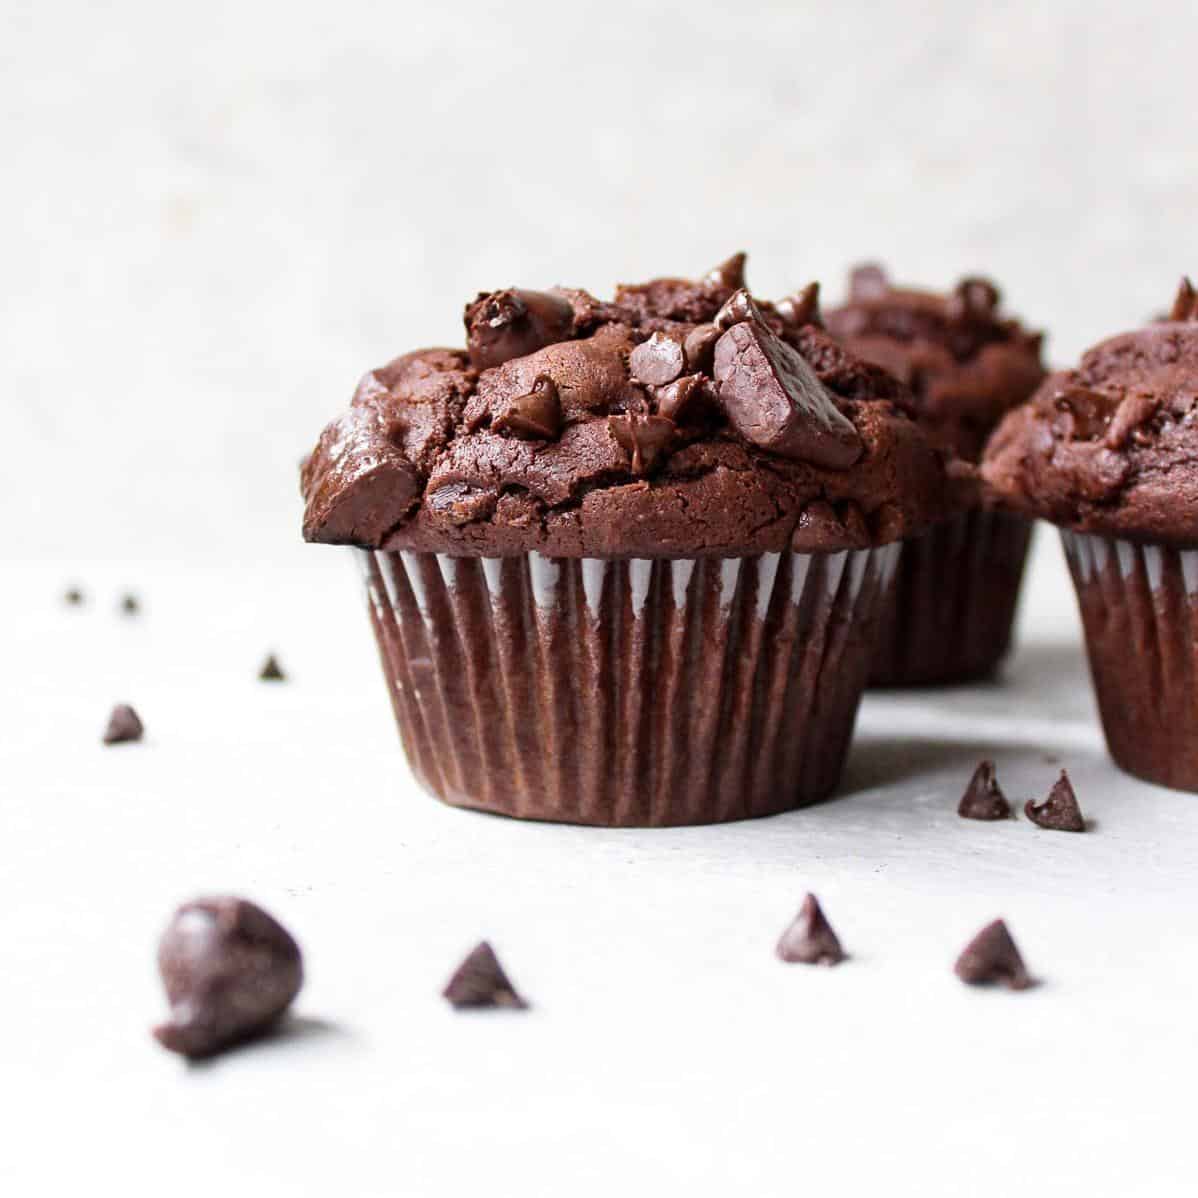  Satisfy any chocolate craving with these muffins.